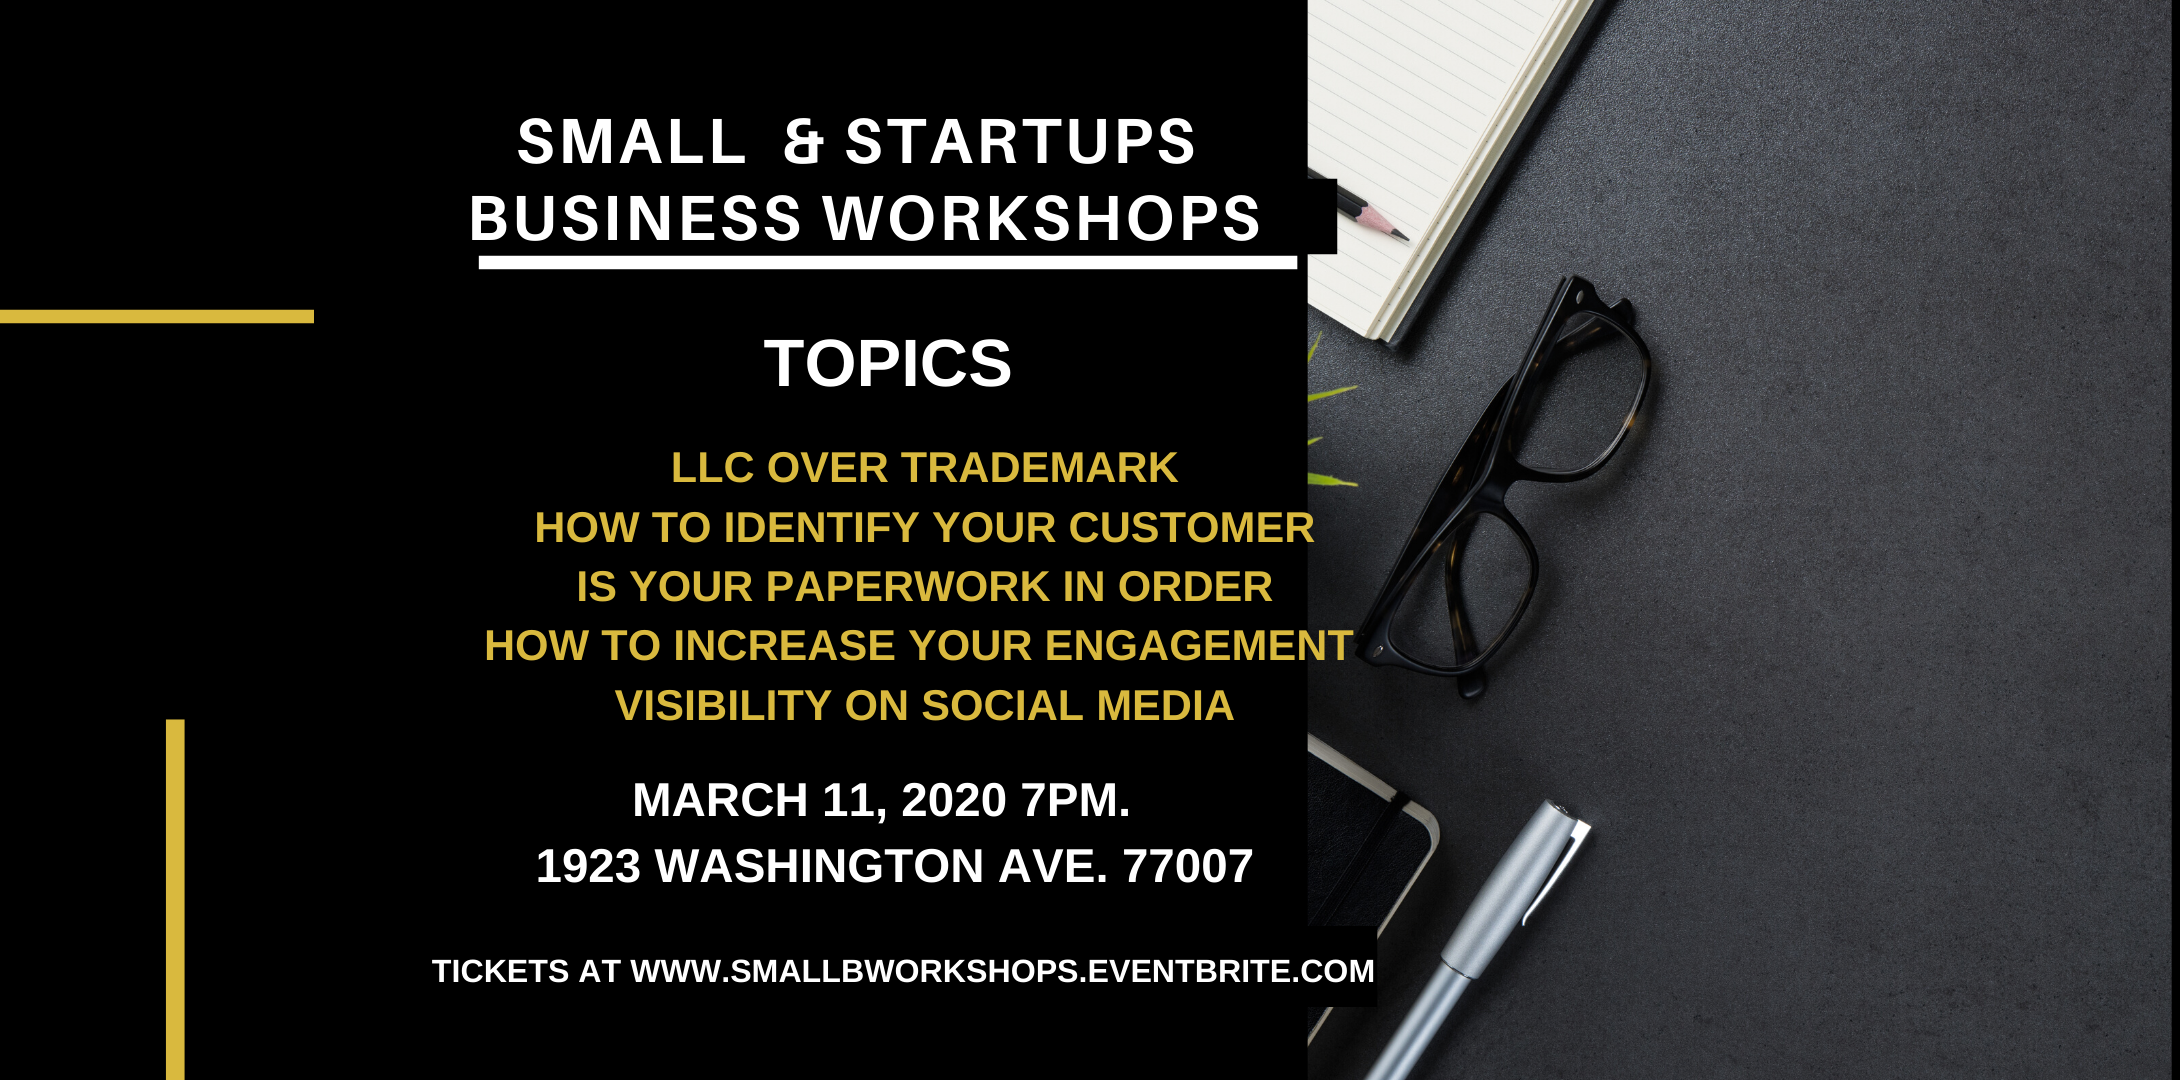 Startup & Small Business Workshops